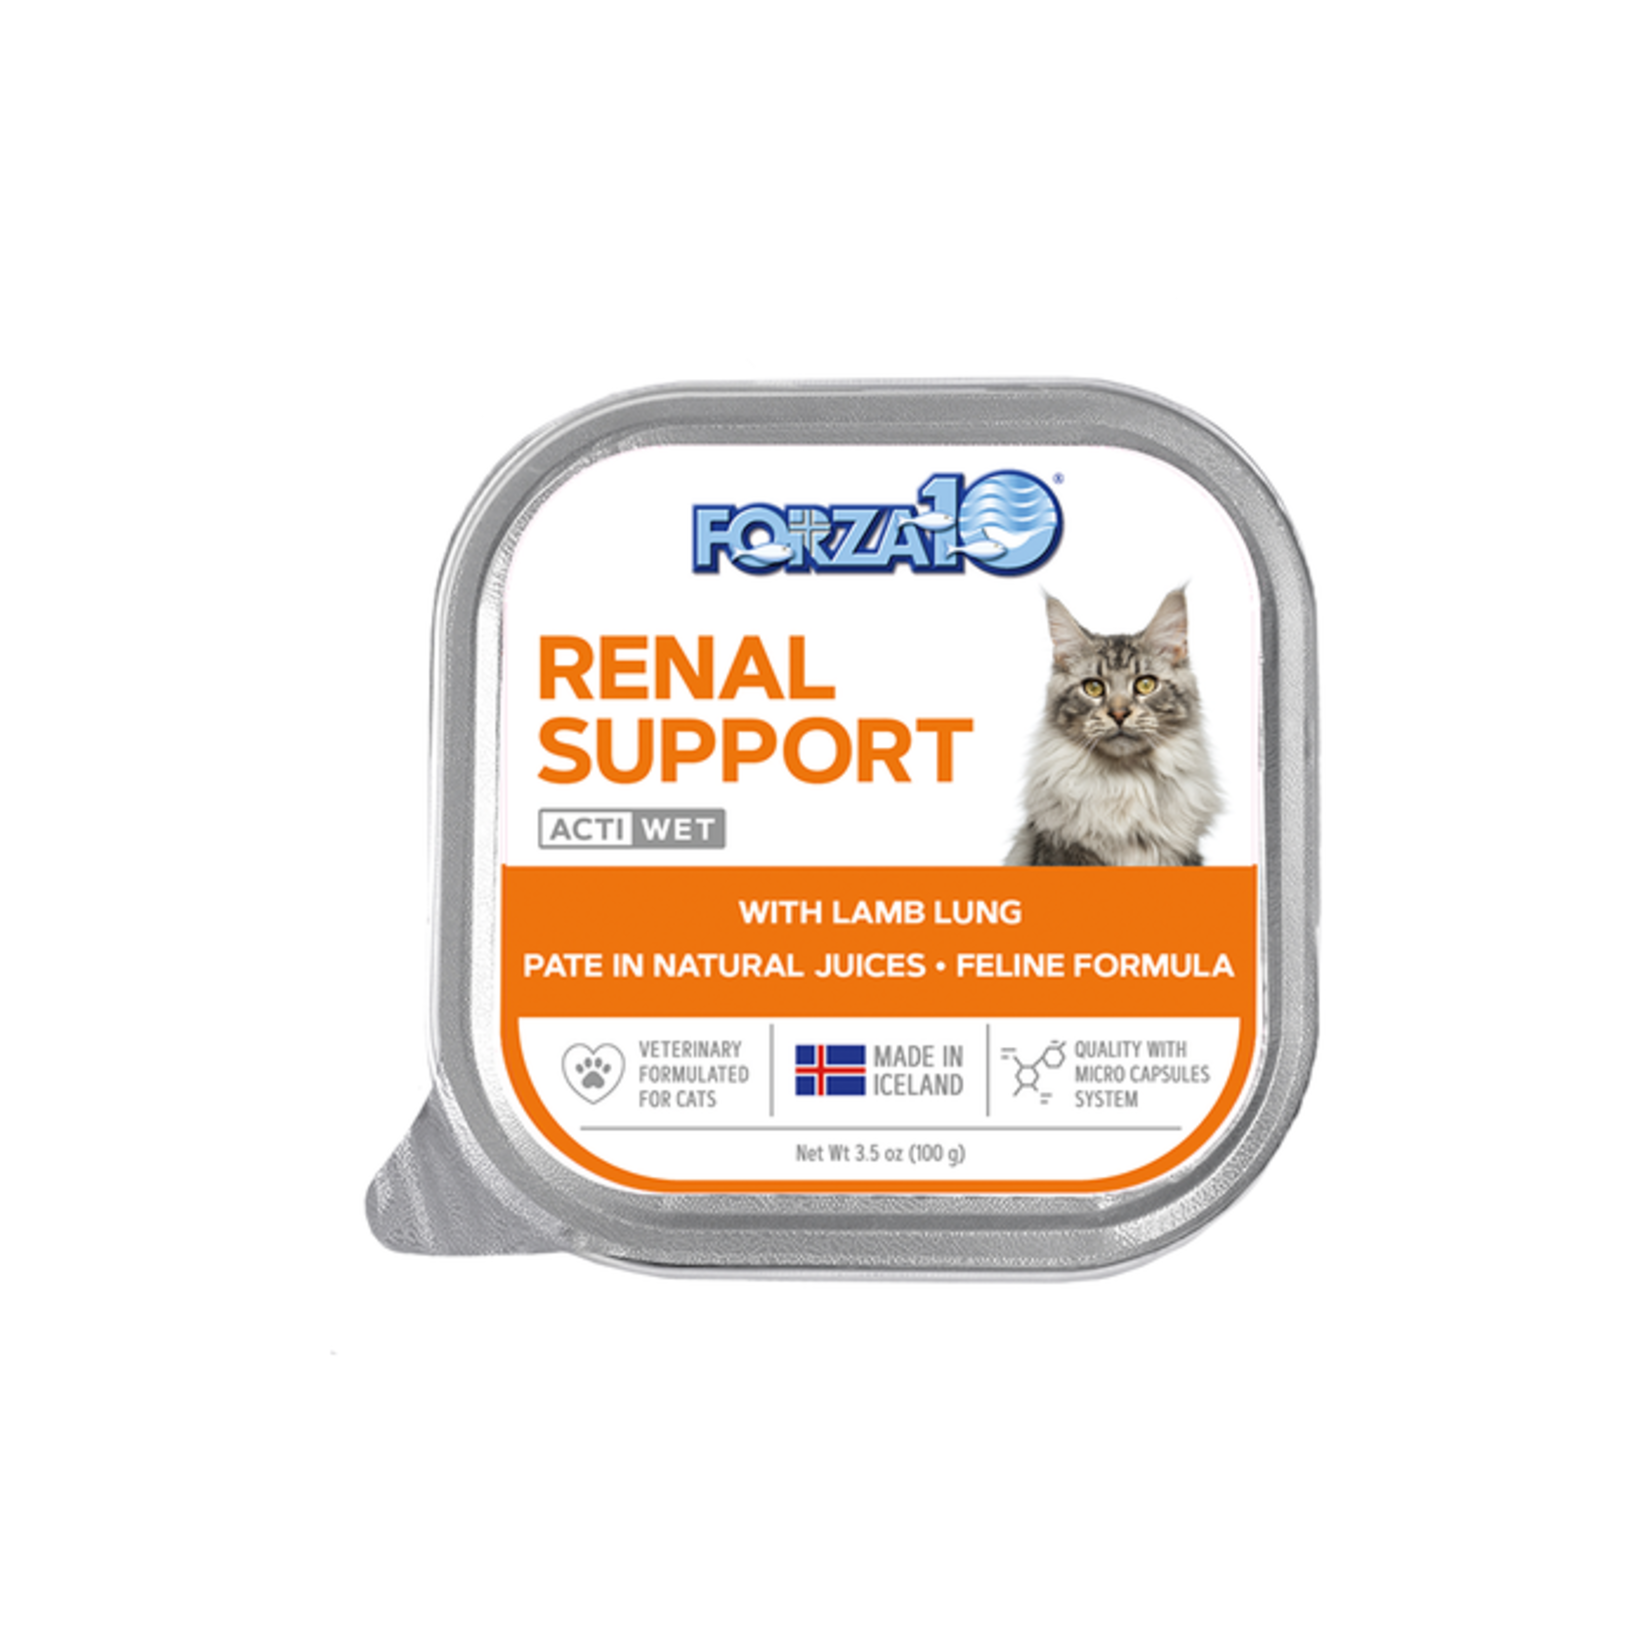 Forza10 Forza10 Nutraceutic Wet Cat Food ActiWet Renal Support with Lamb Lung Formula 3.5oz